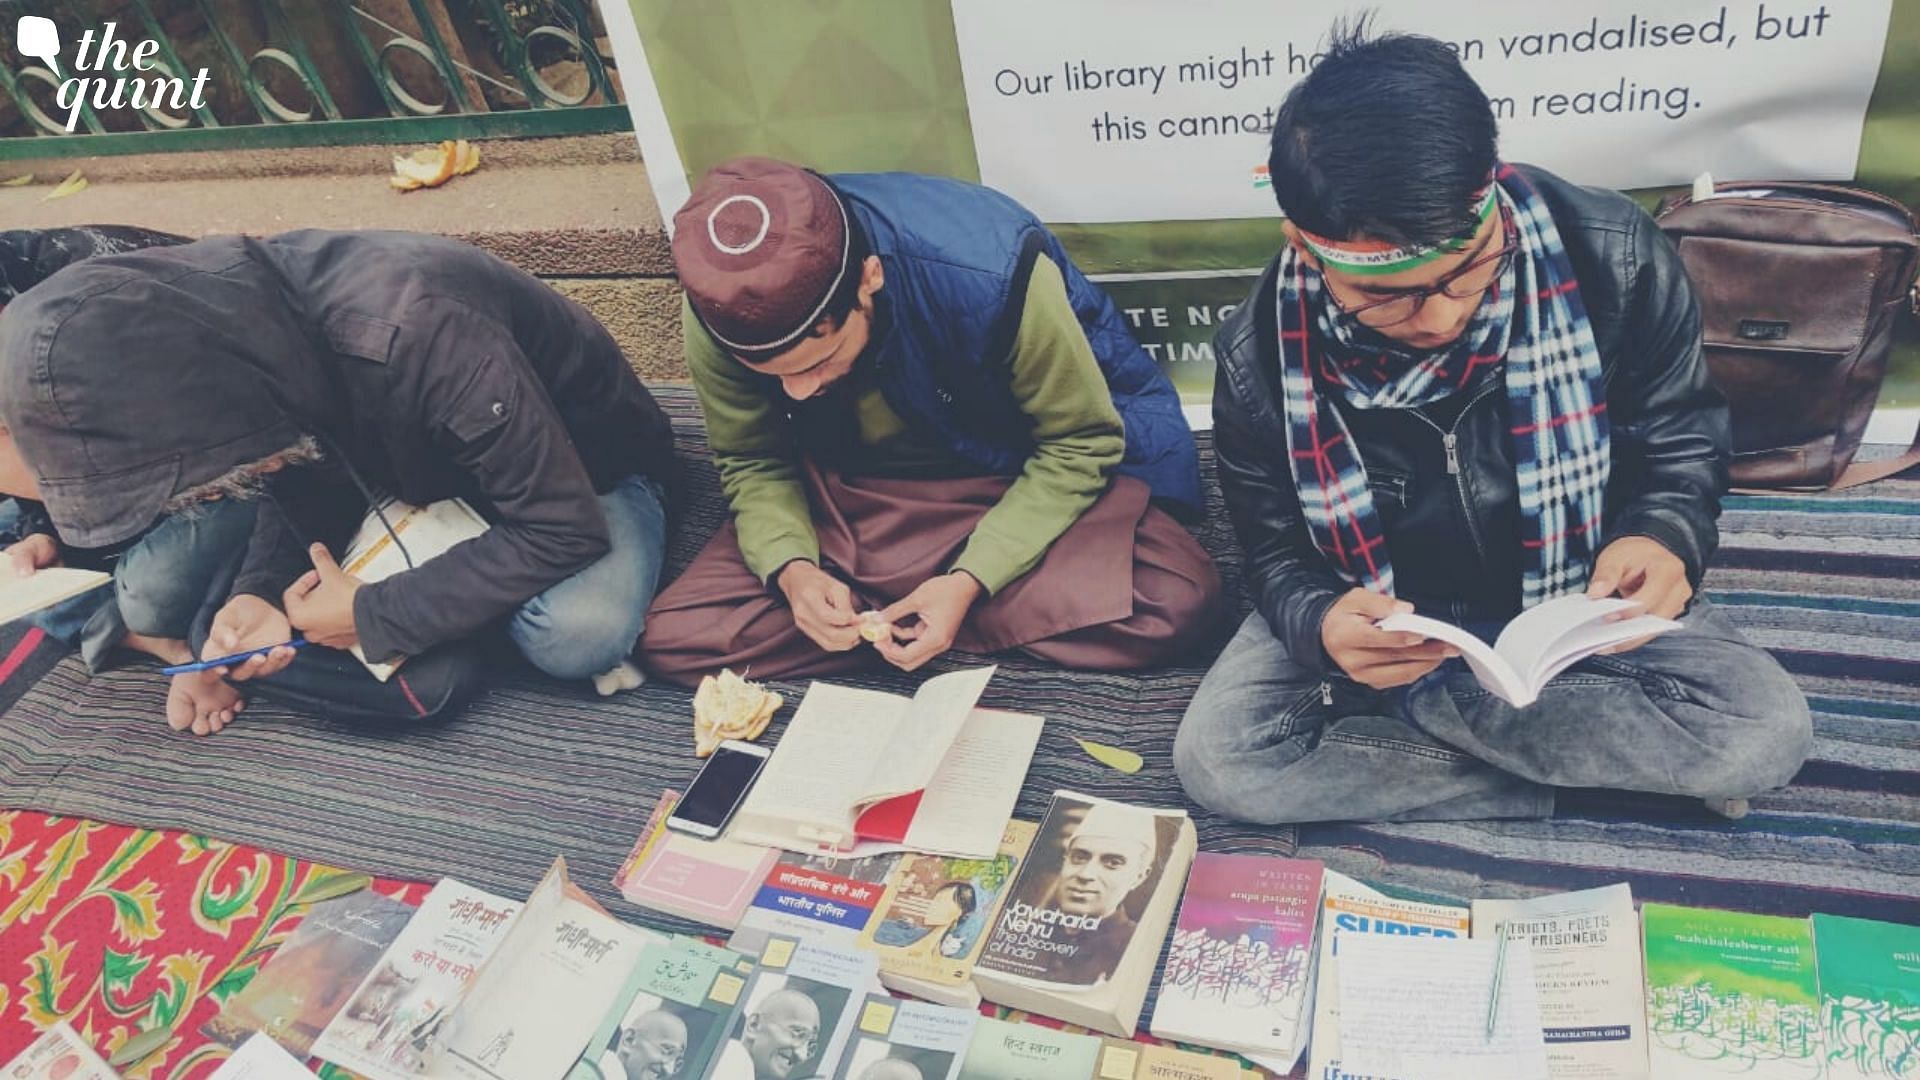 Days after Jamia’s library was vandalised in police action, students open one on the streets, pledge to ‘Read for Revolution.’